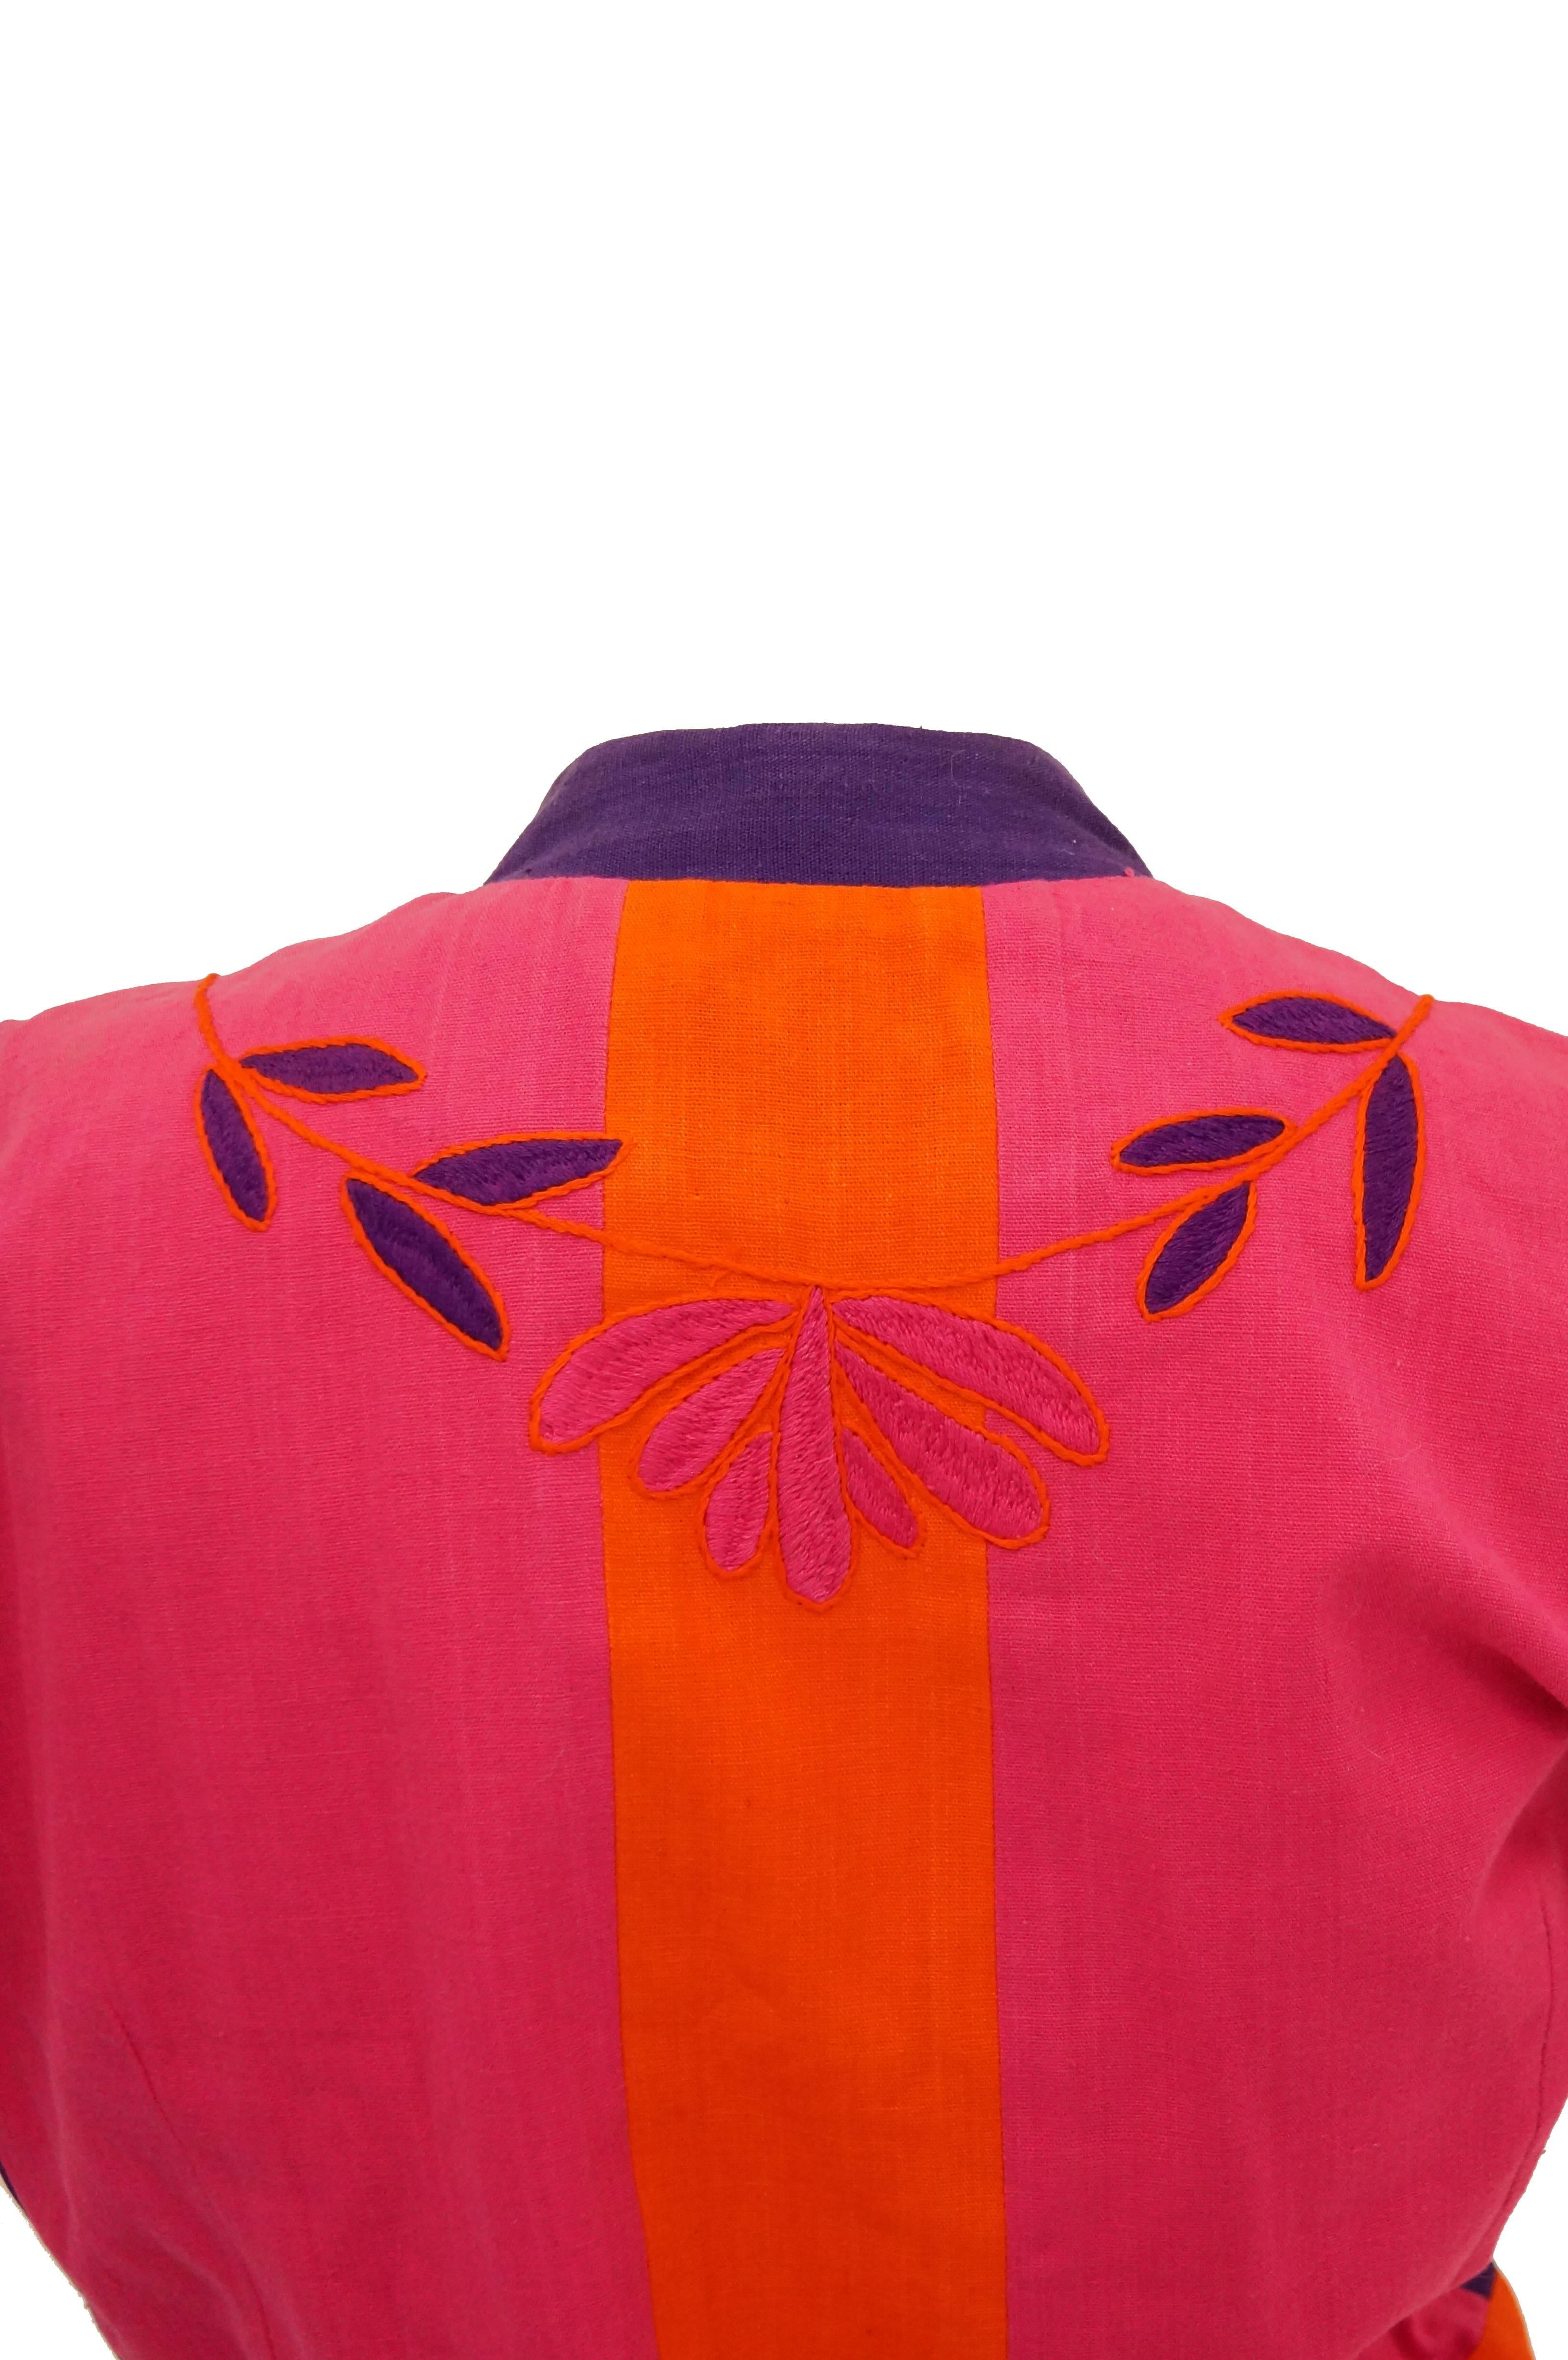 1960s Josefa Pink, Orange, and Purple Embroidered Mexican Shirt and Top For Sale 1